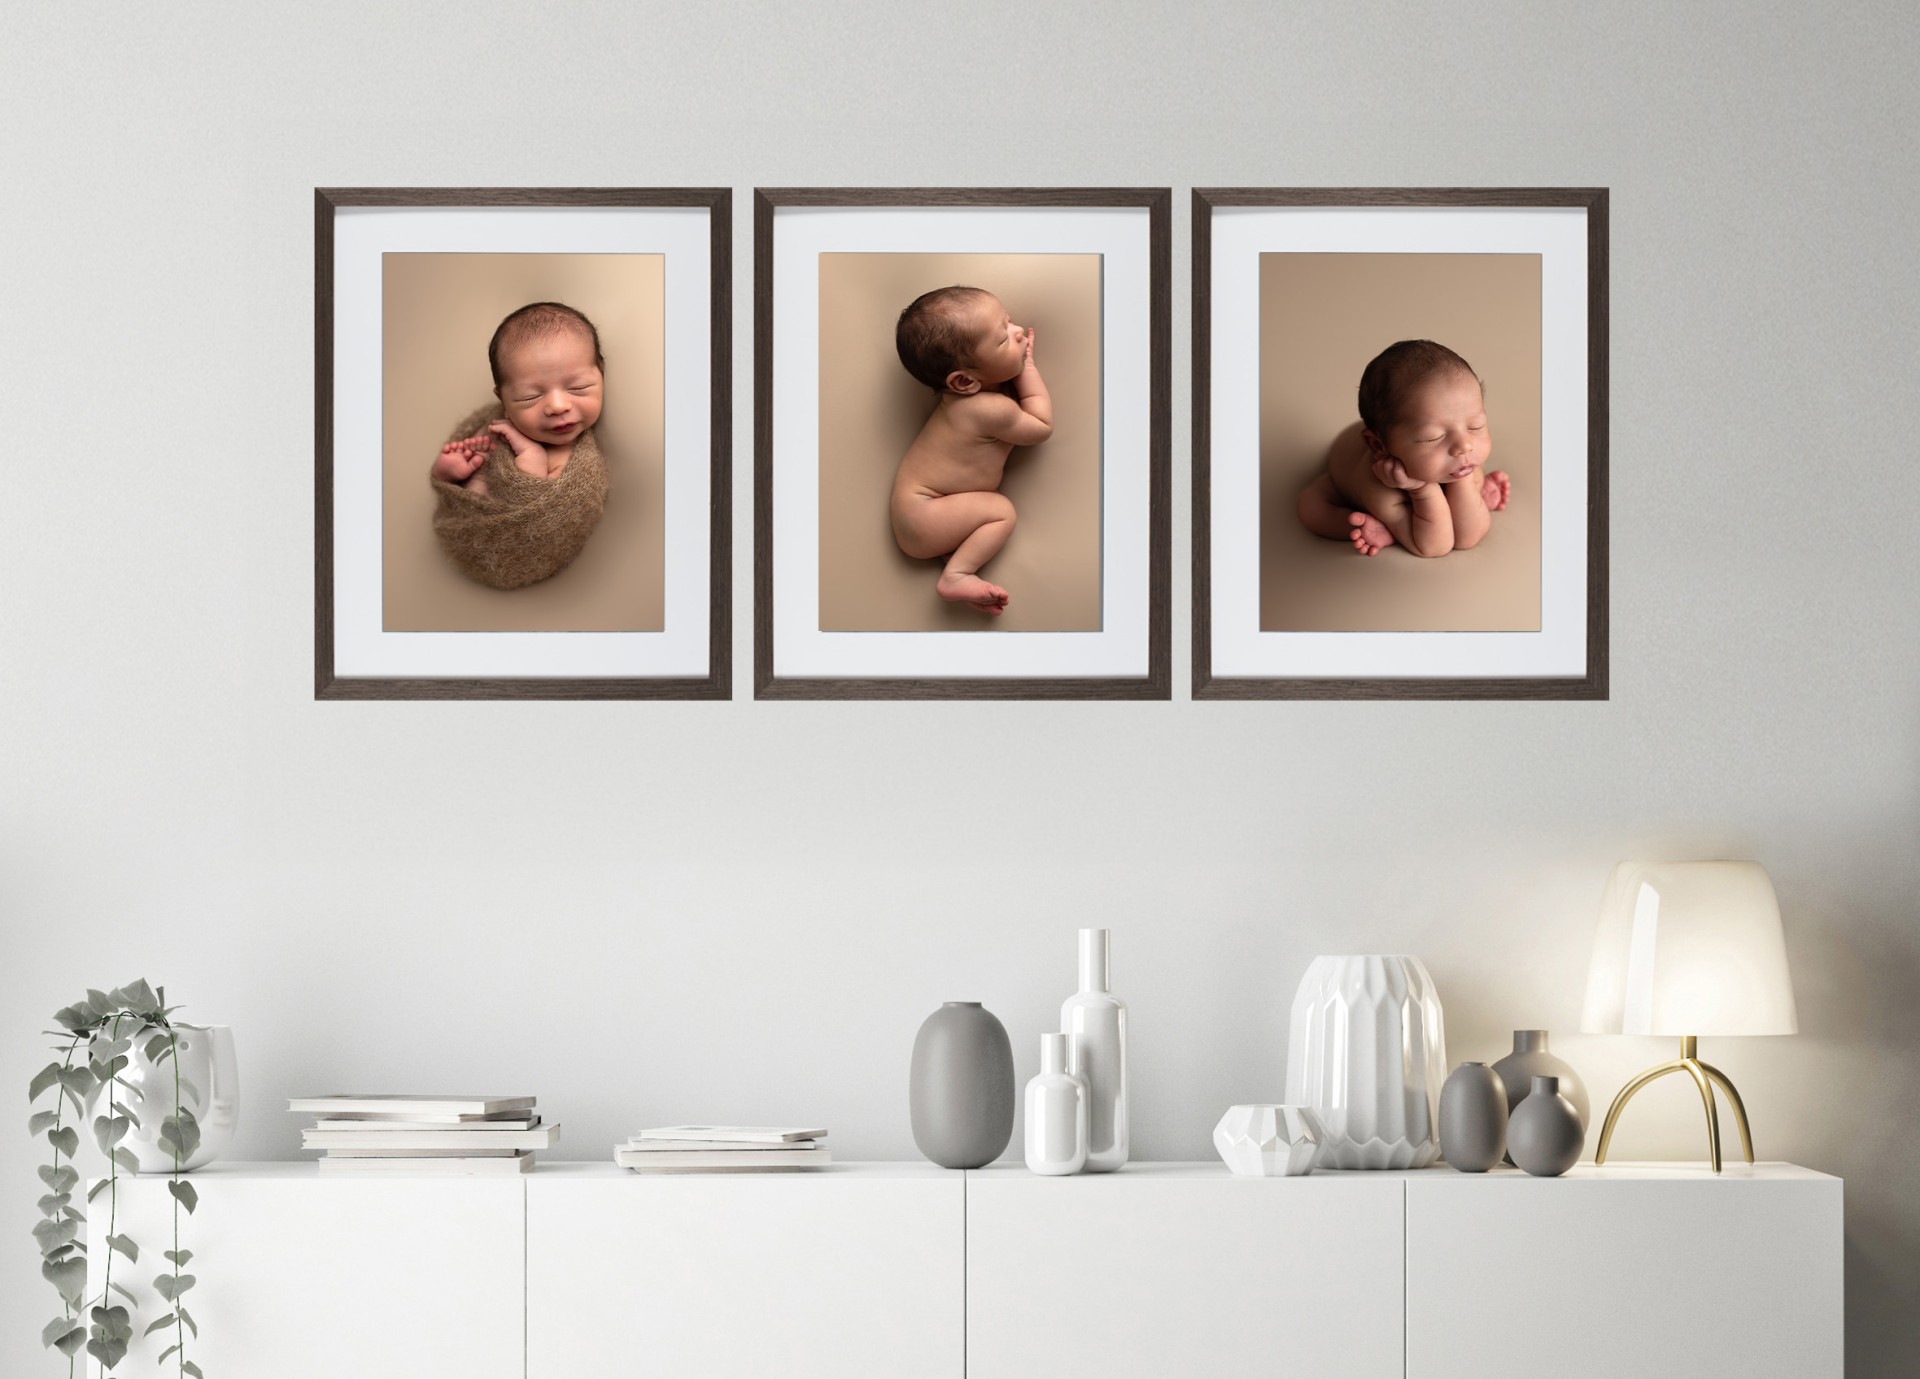 Photos of a newborn on the wall in row